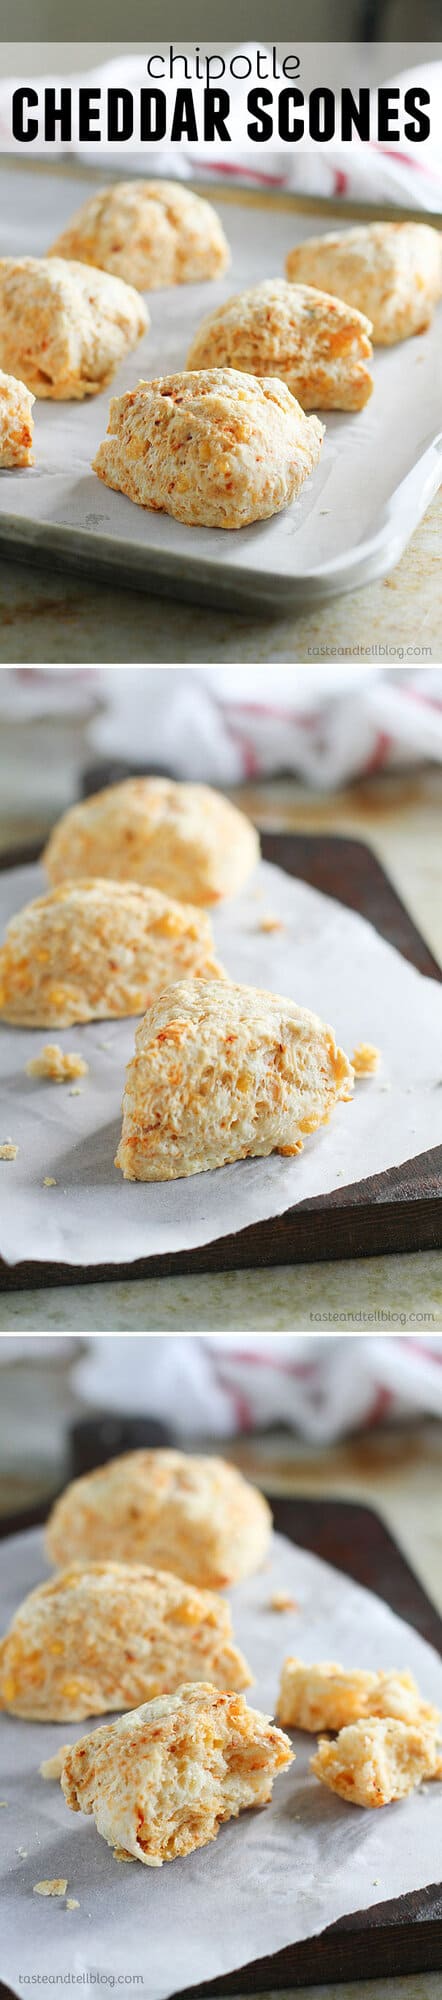 Scones aren't just for a sweet treat - these Chipotle Cheddar Scones are cheesy and slightly spicy and make a perfect side for dinner.